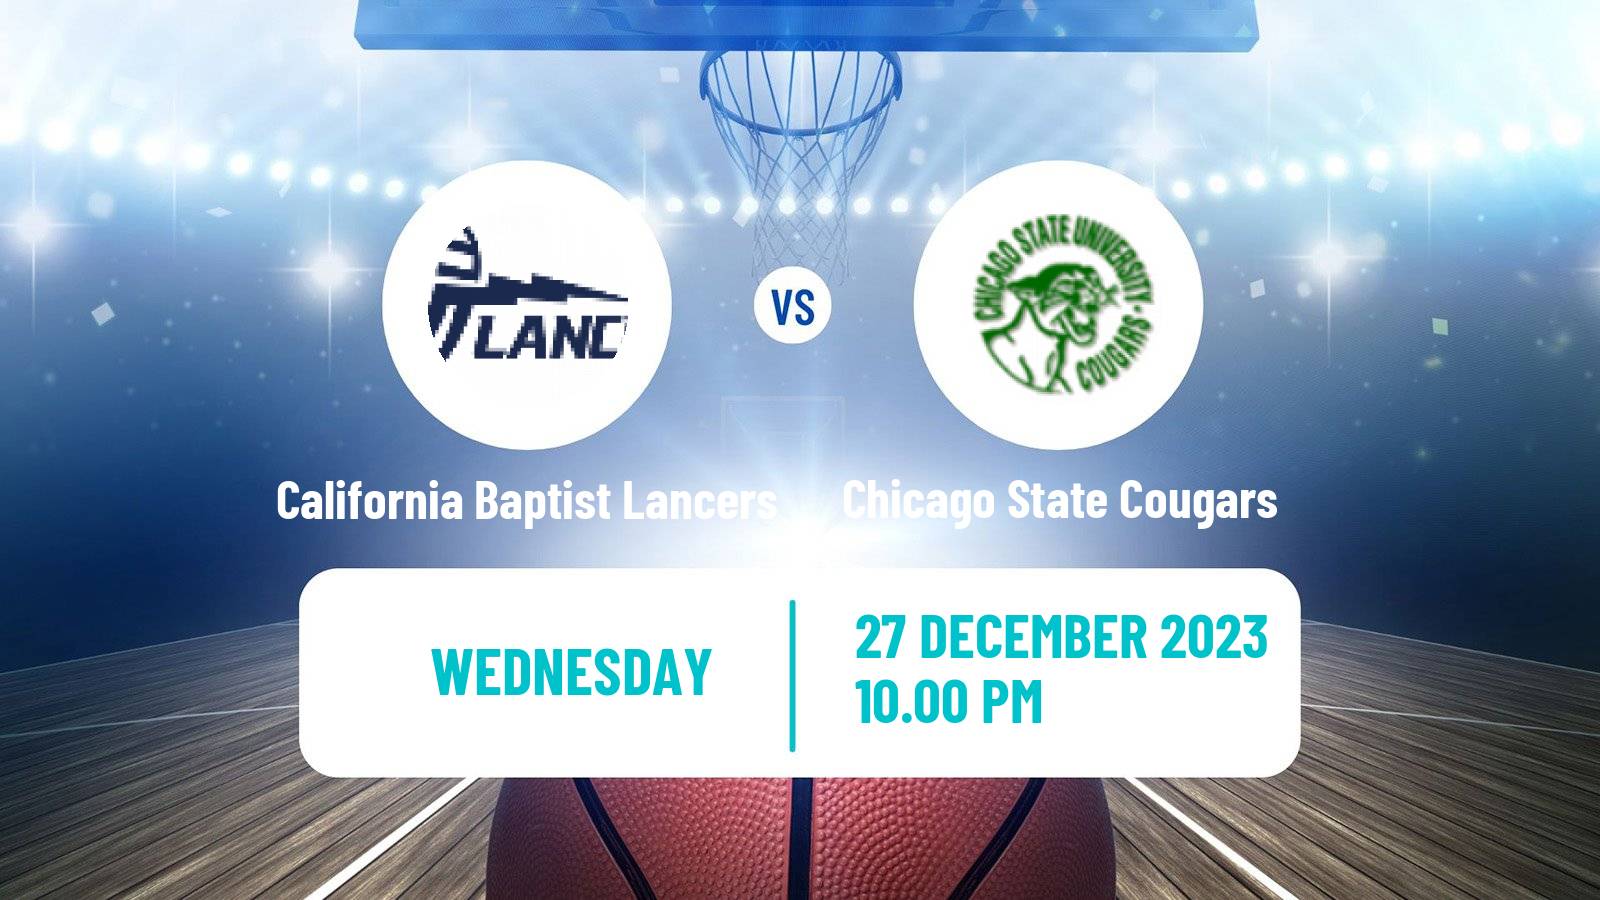 Basketball NCAA College Basketball California Baptist Lancers - Chicago State Cougars